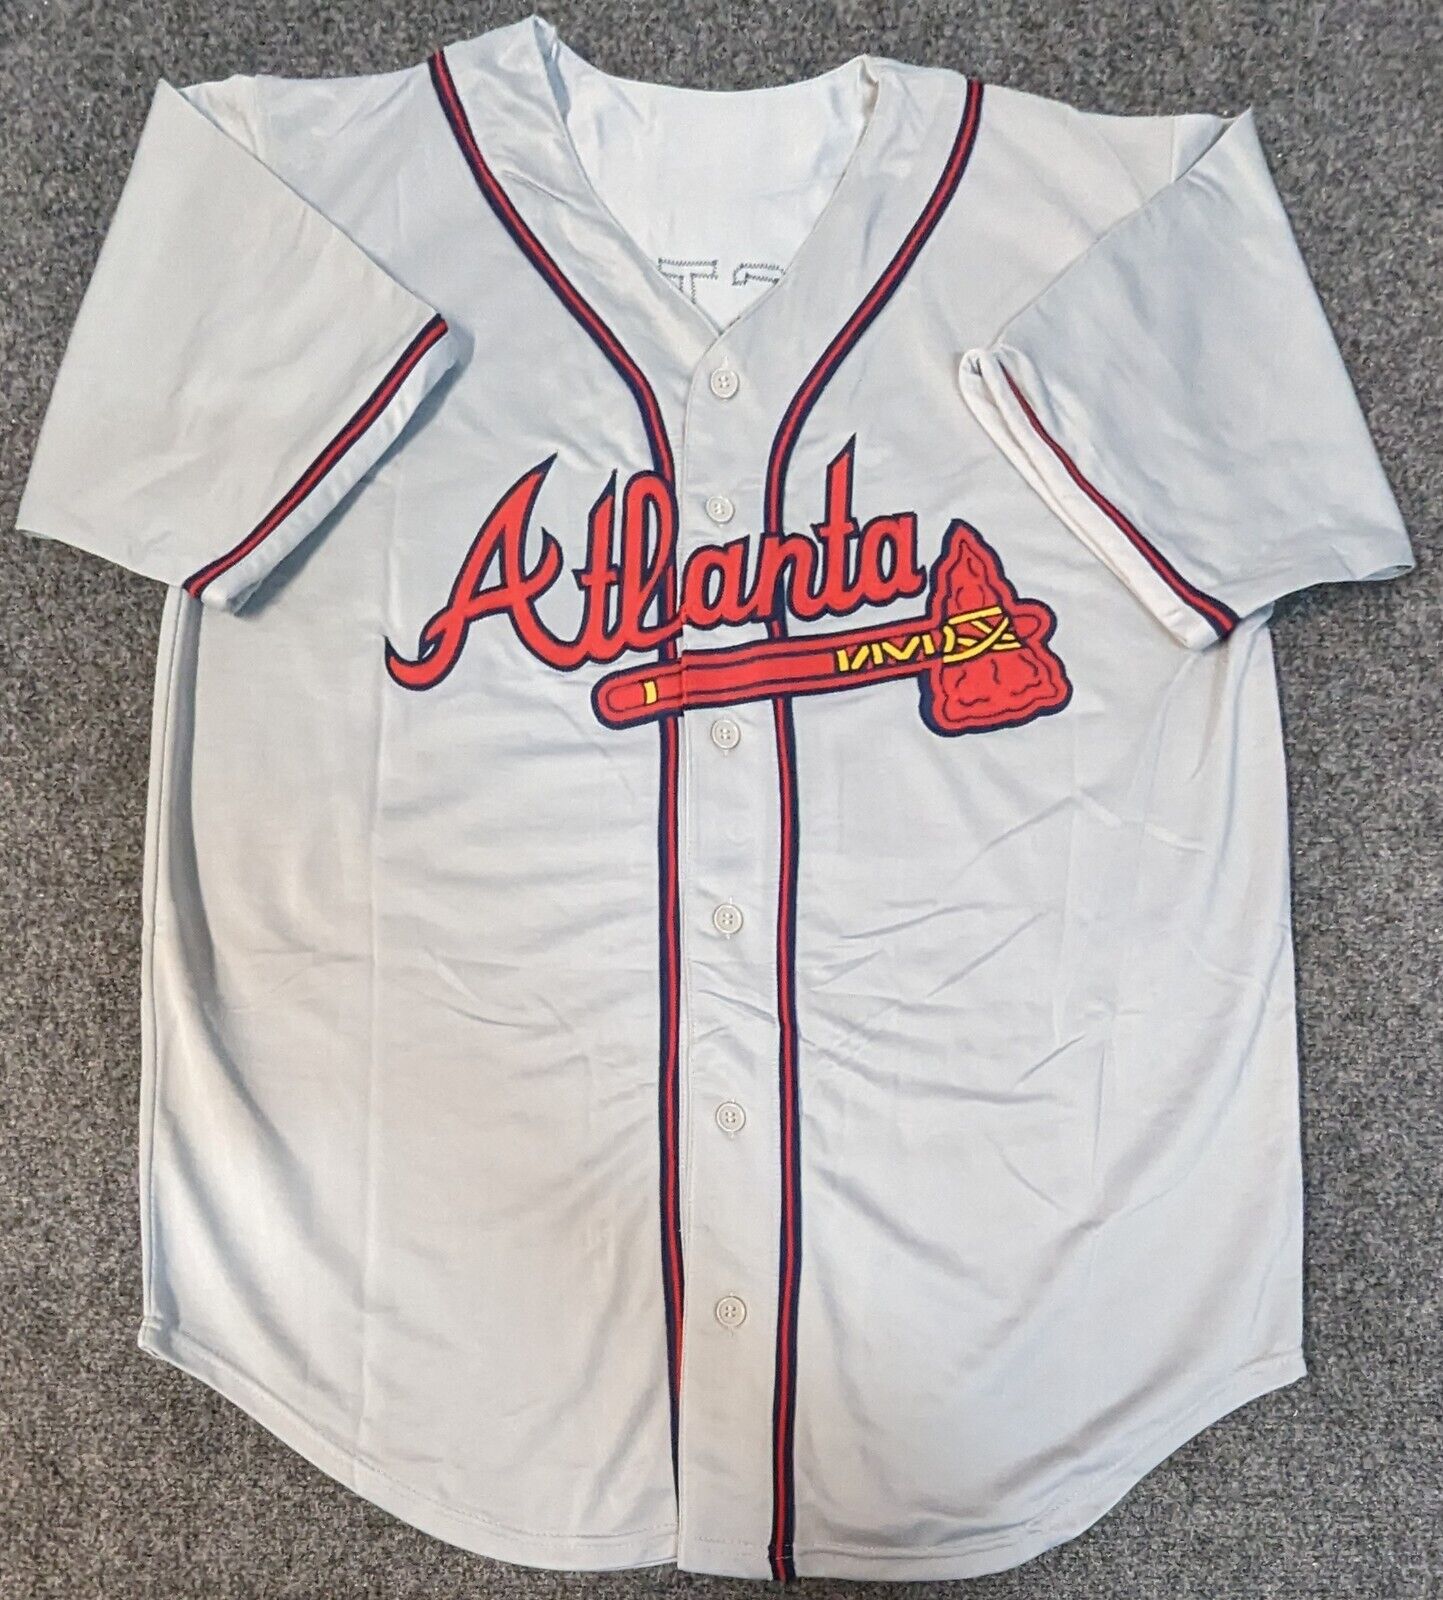 David Justice Women's Atlanta Braves Home Jersey - White Authentic